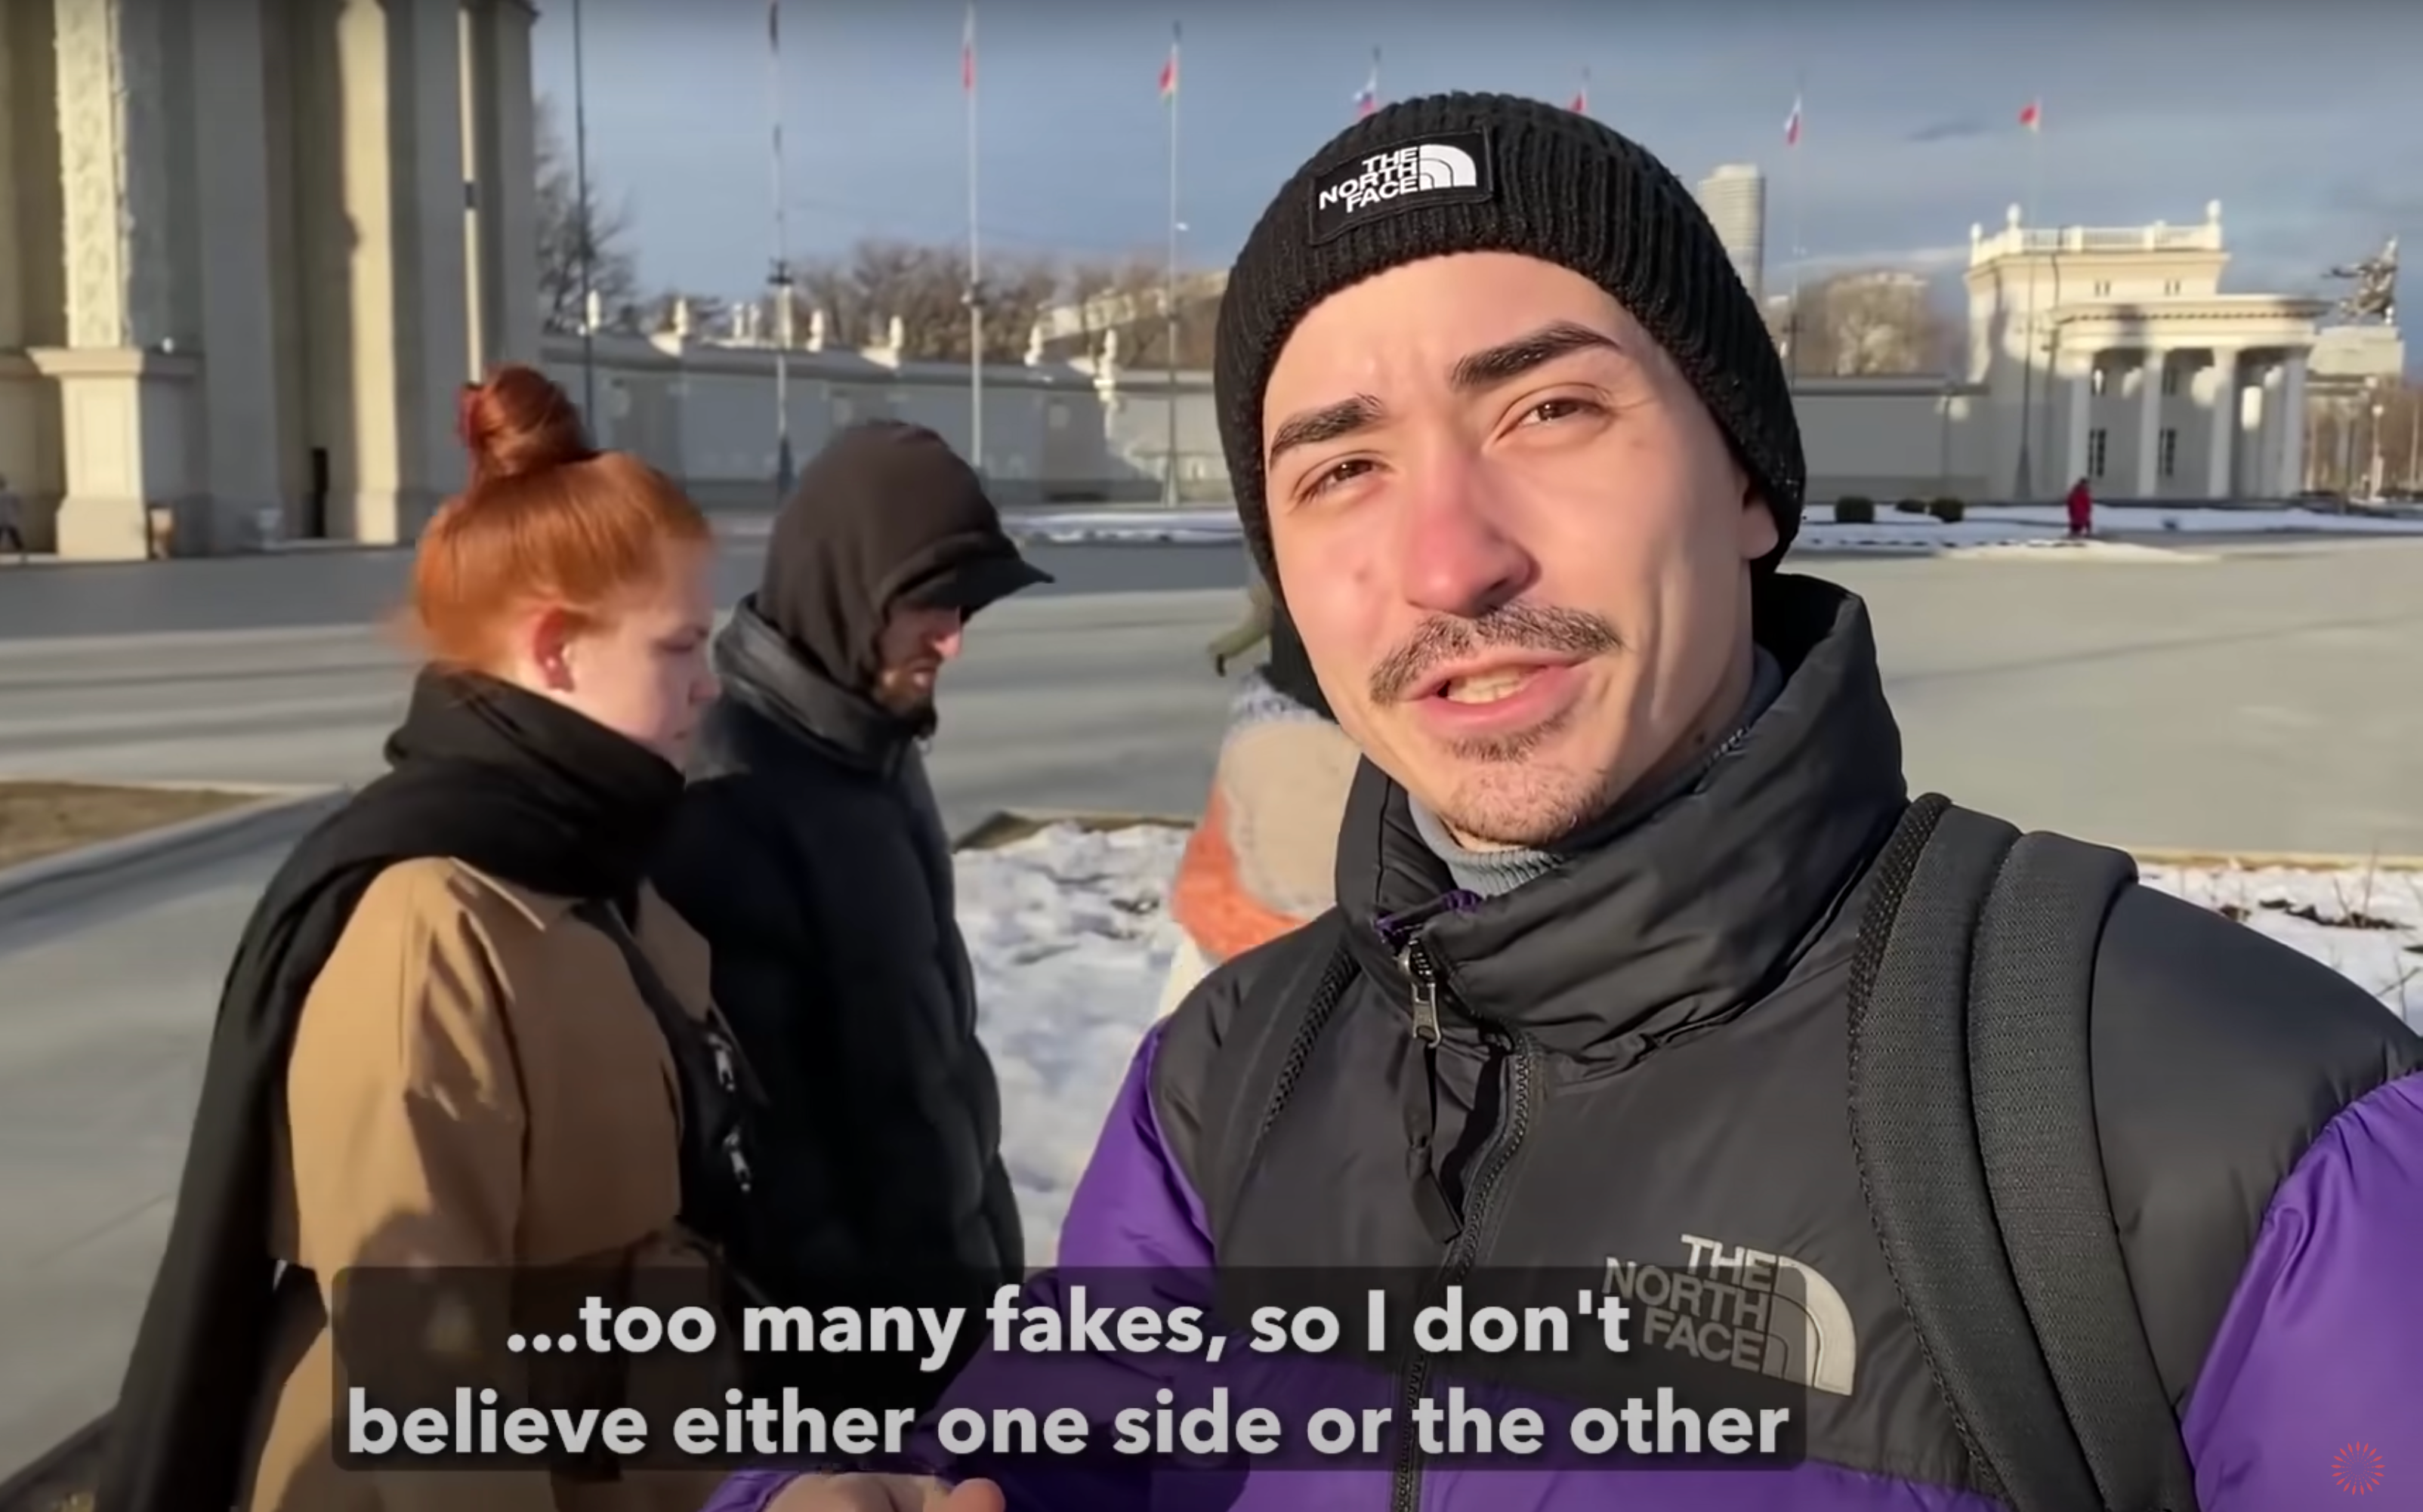 A pedestrian in Moscow says he doesn’t know whether to believe the atrocities in Bucha, Ukraine